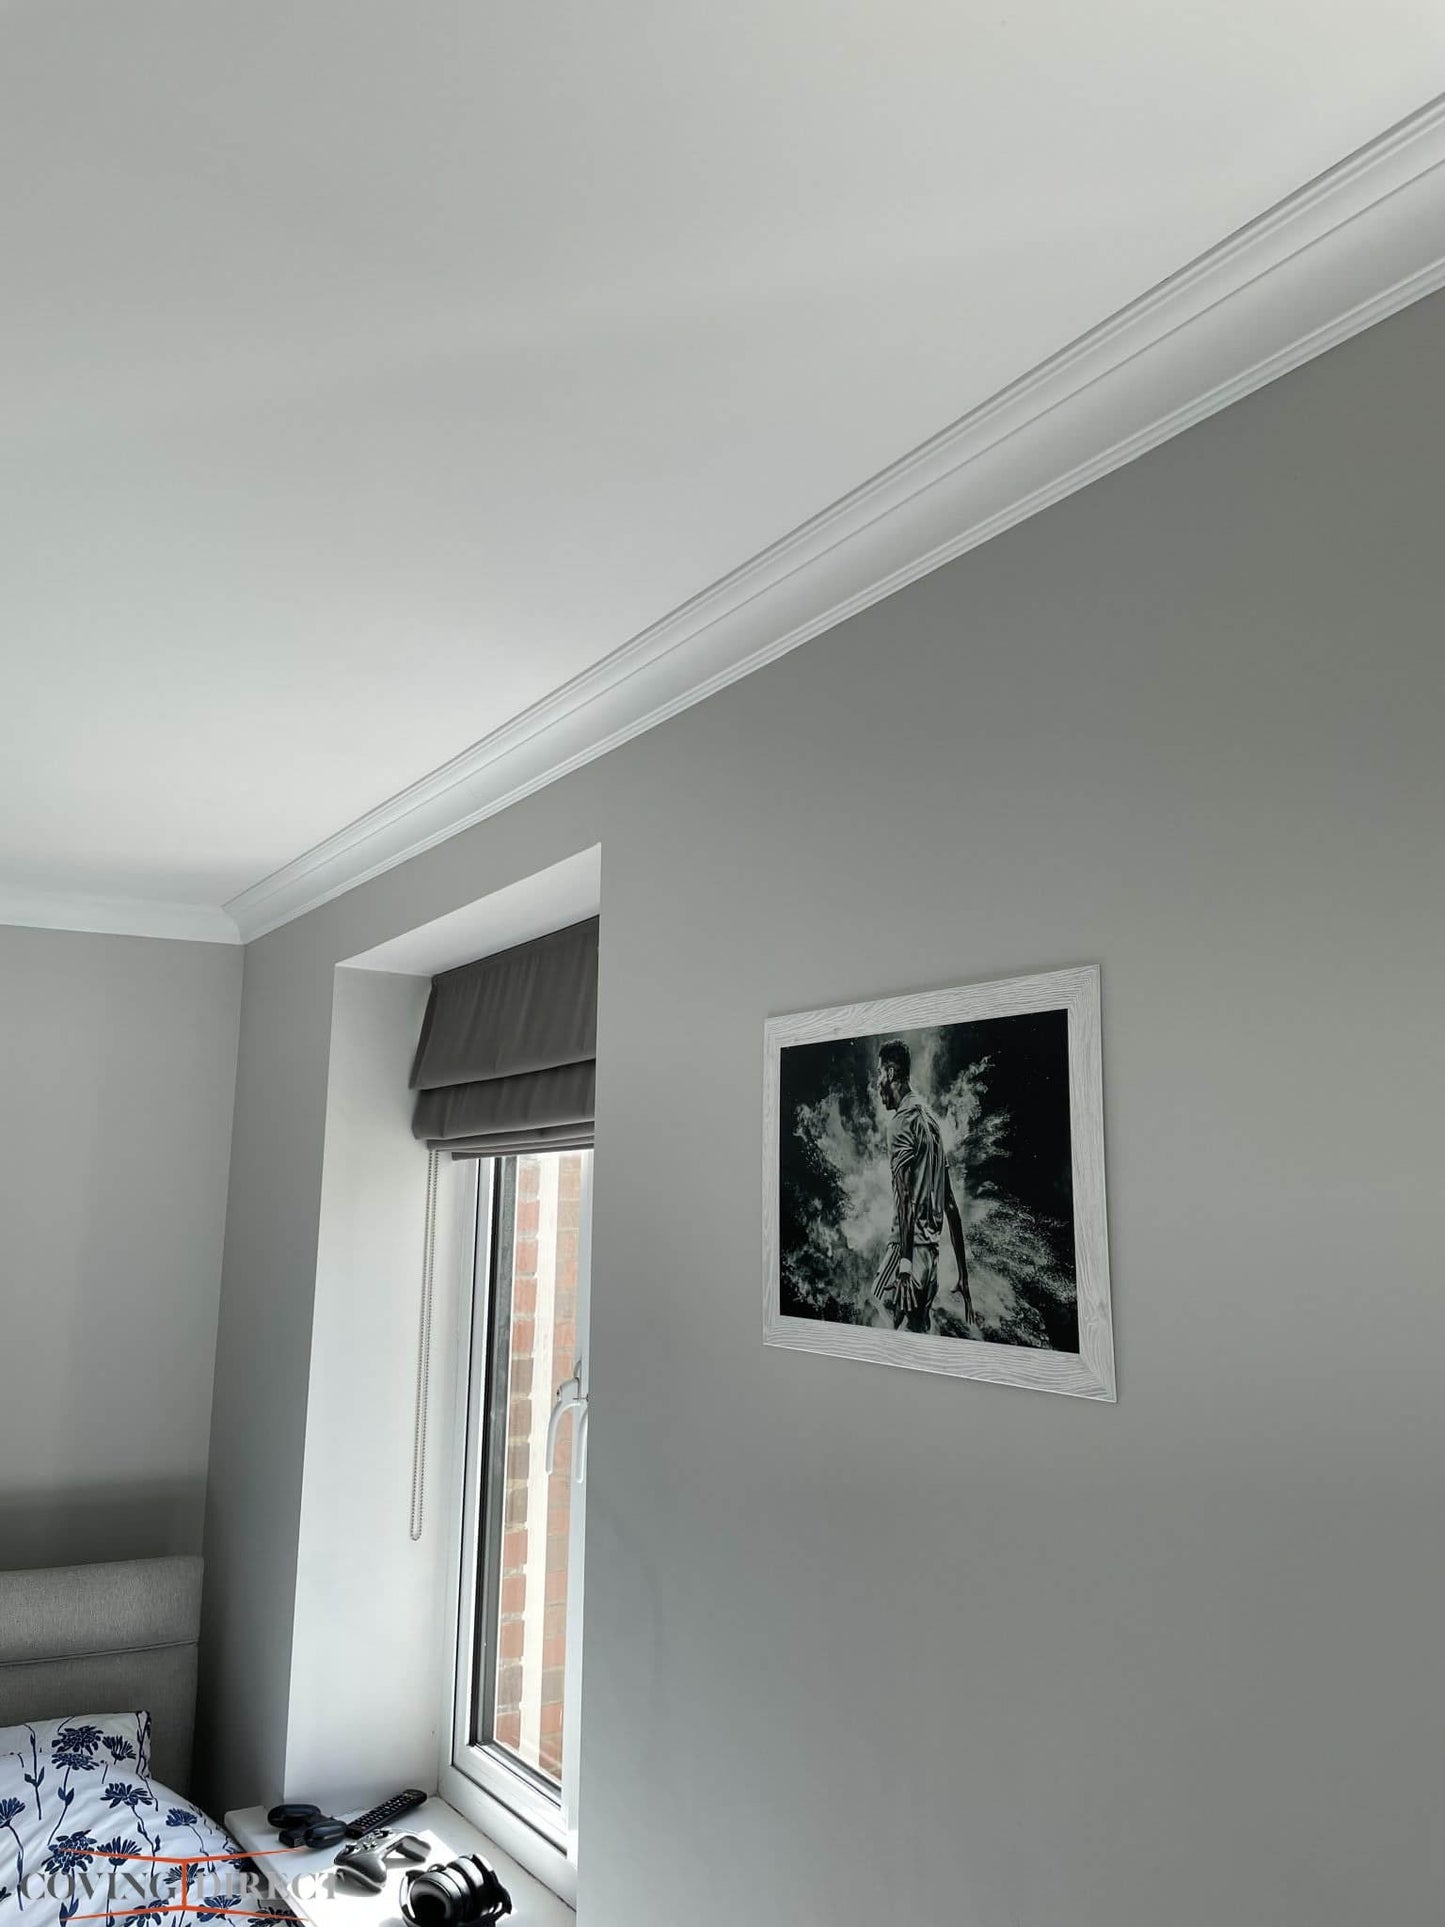 MD367 - Modern Coving above a window